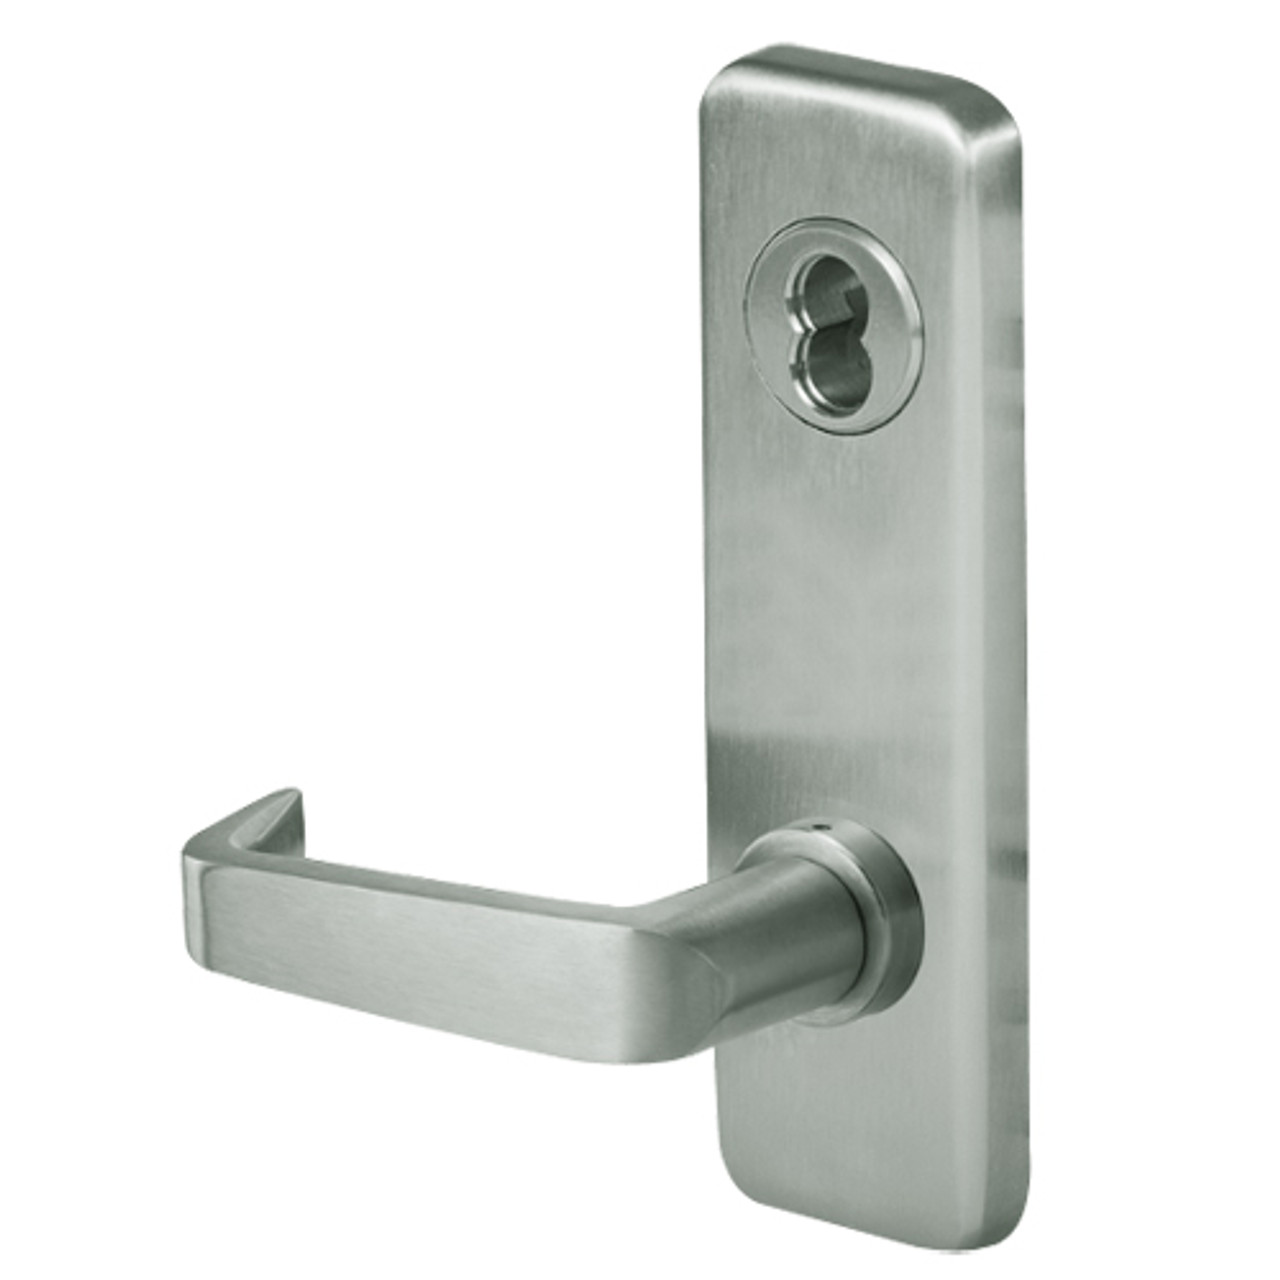 45H0N15J619 Best 40H Series Passage Heavy Duty Mortise Lever Lock with Contour with Angle Return Style in Satin Nickel